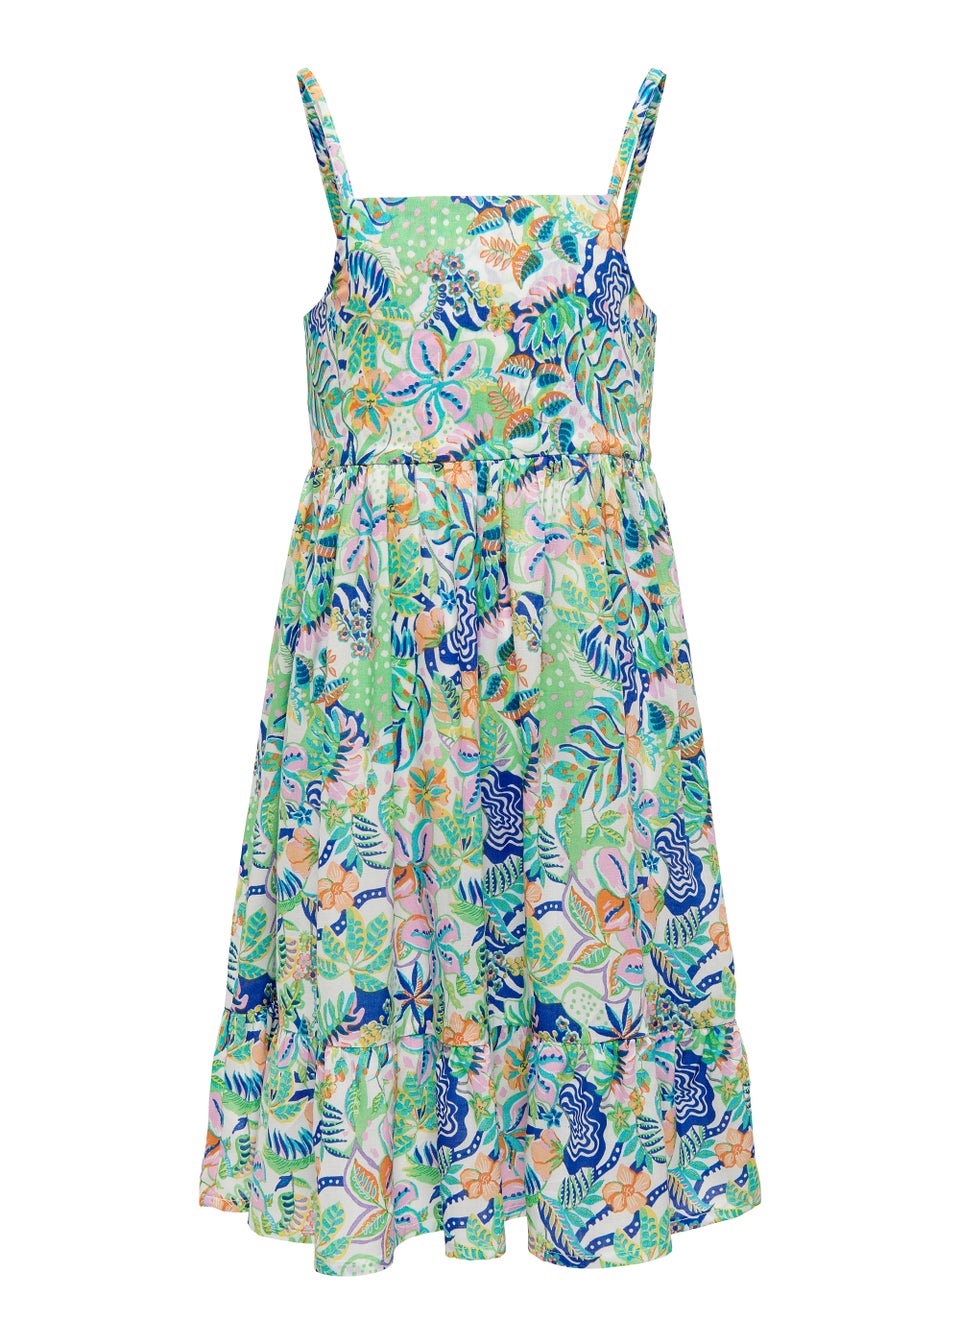 ONLY Kids Multicoloured Print Dress (6-14yrs)